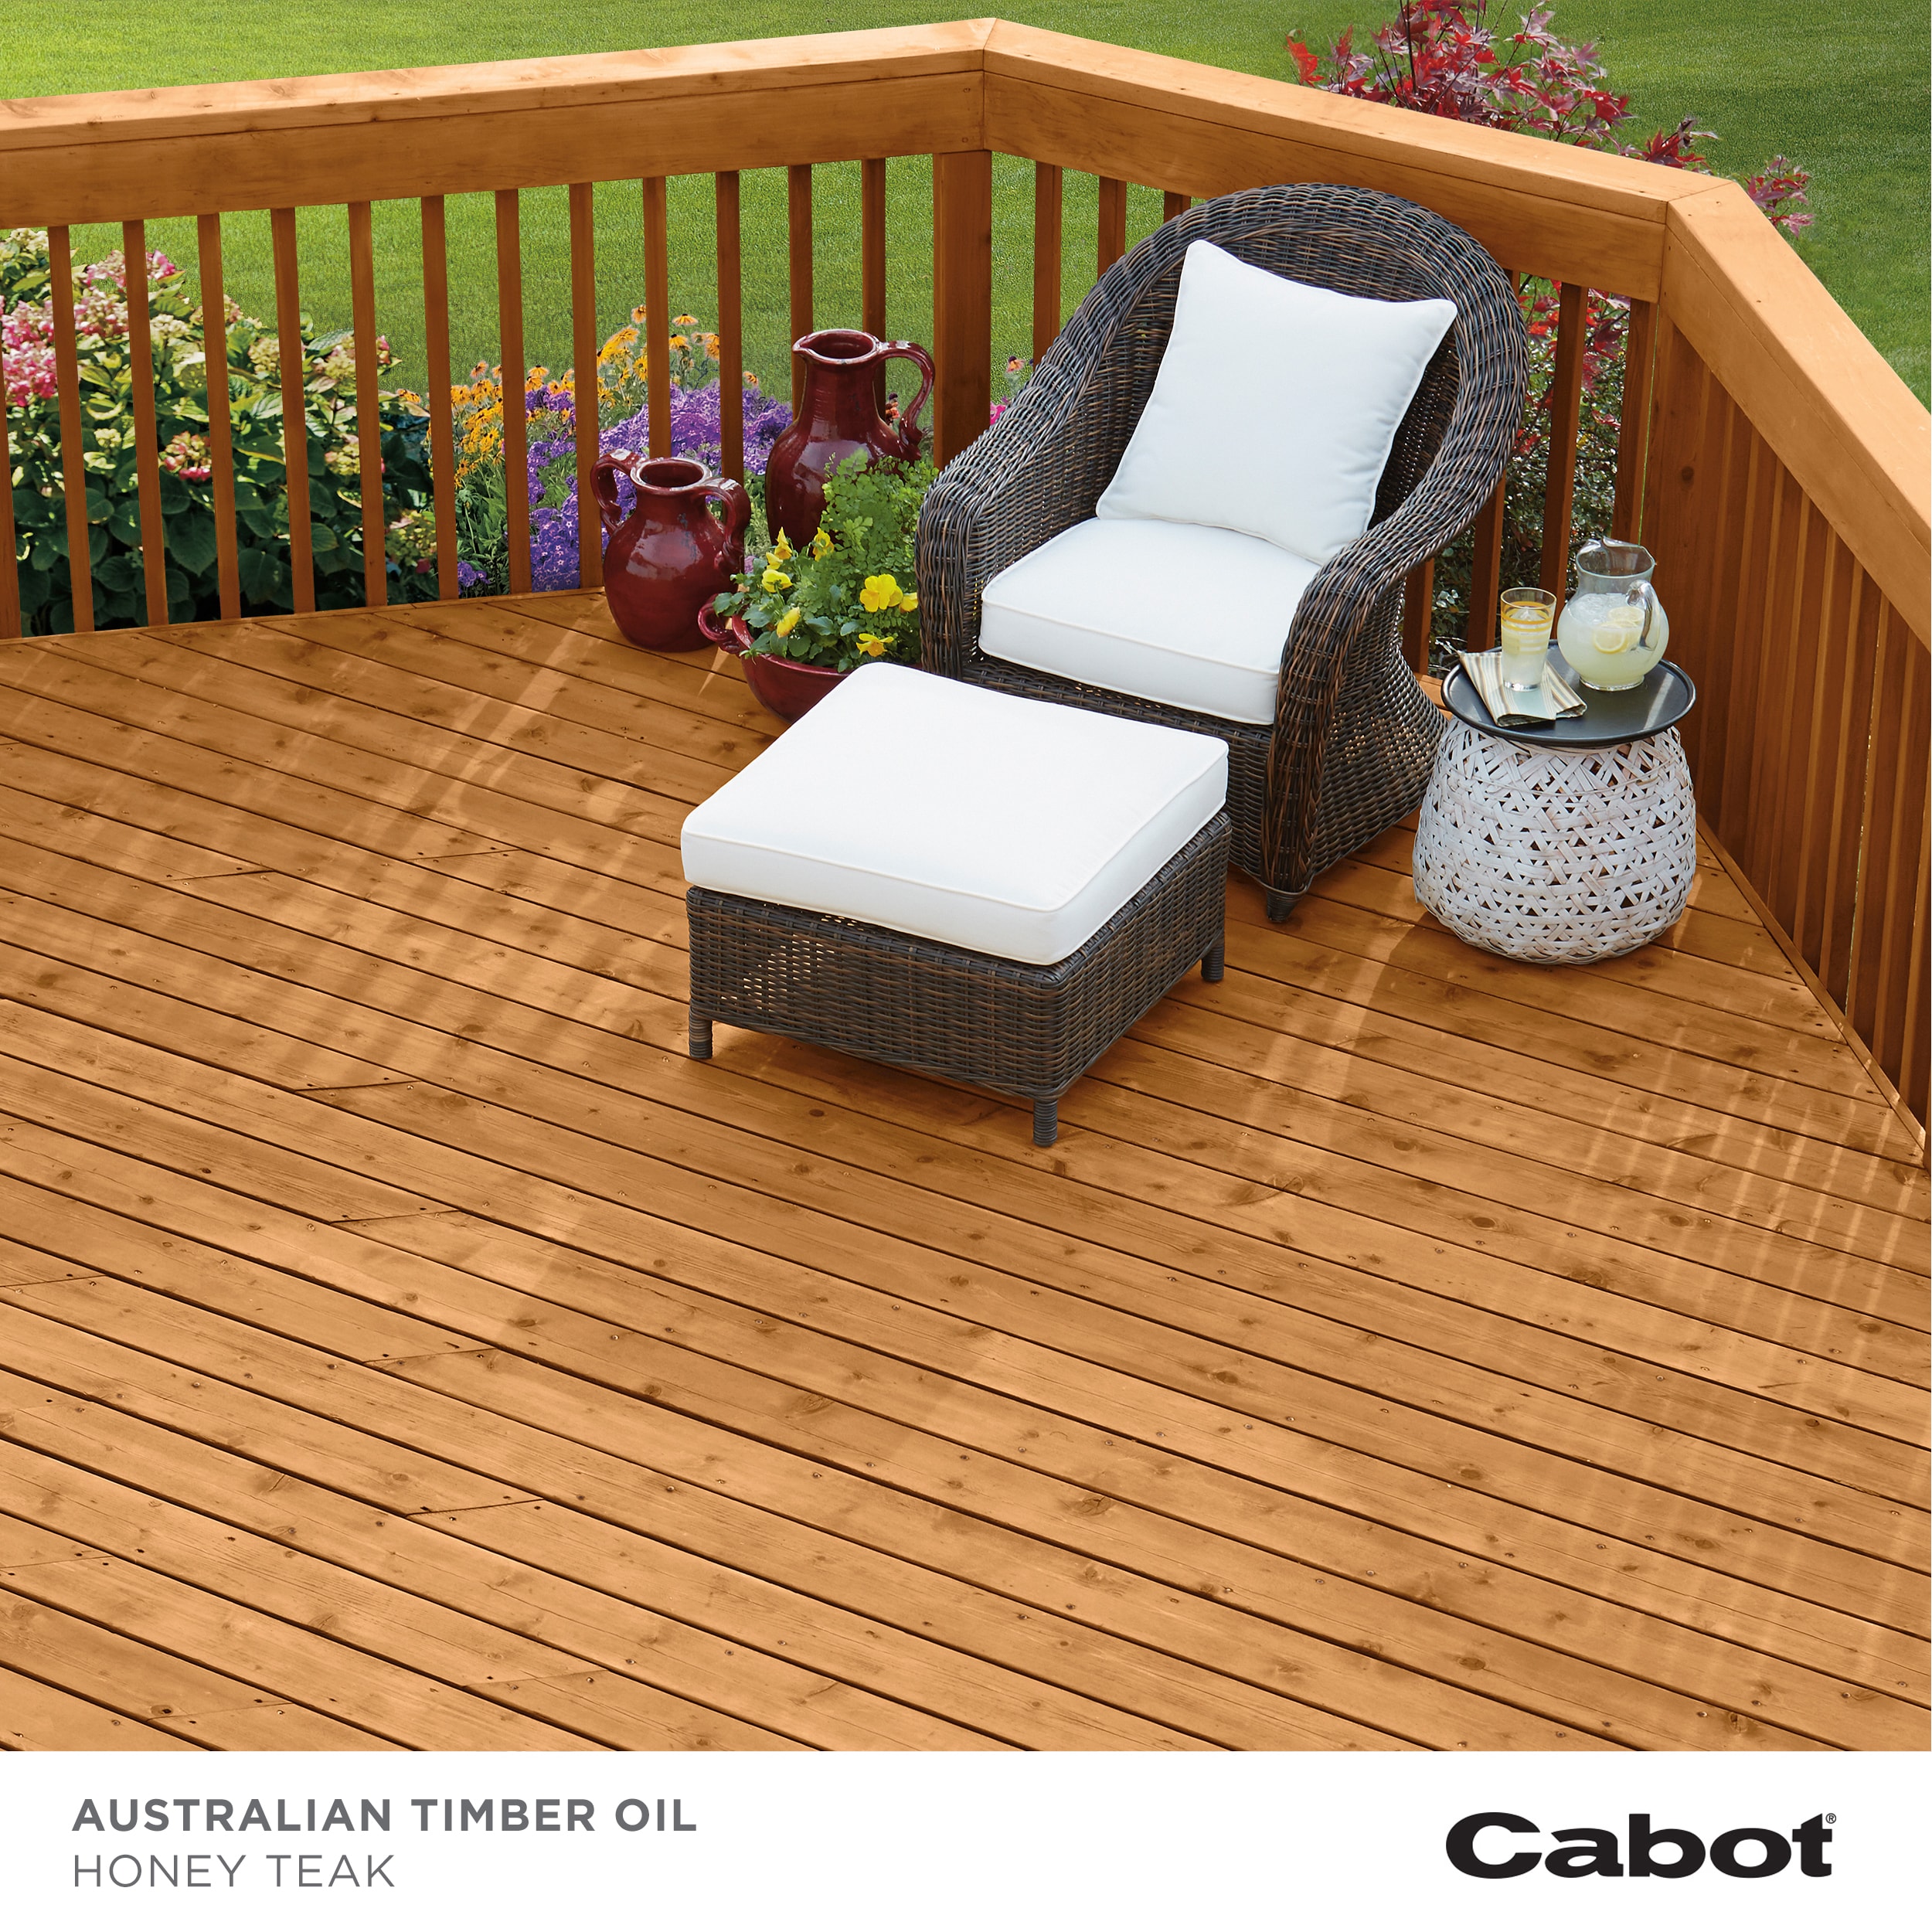 Can You Stain Teak Wood Fences and Furniture? - Teak & Deck Professionals